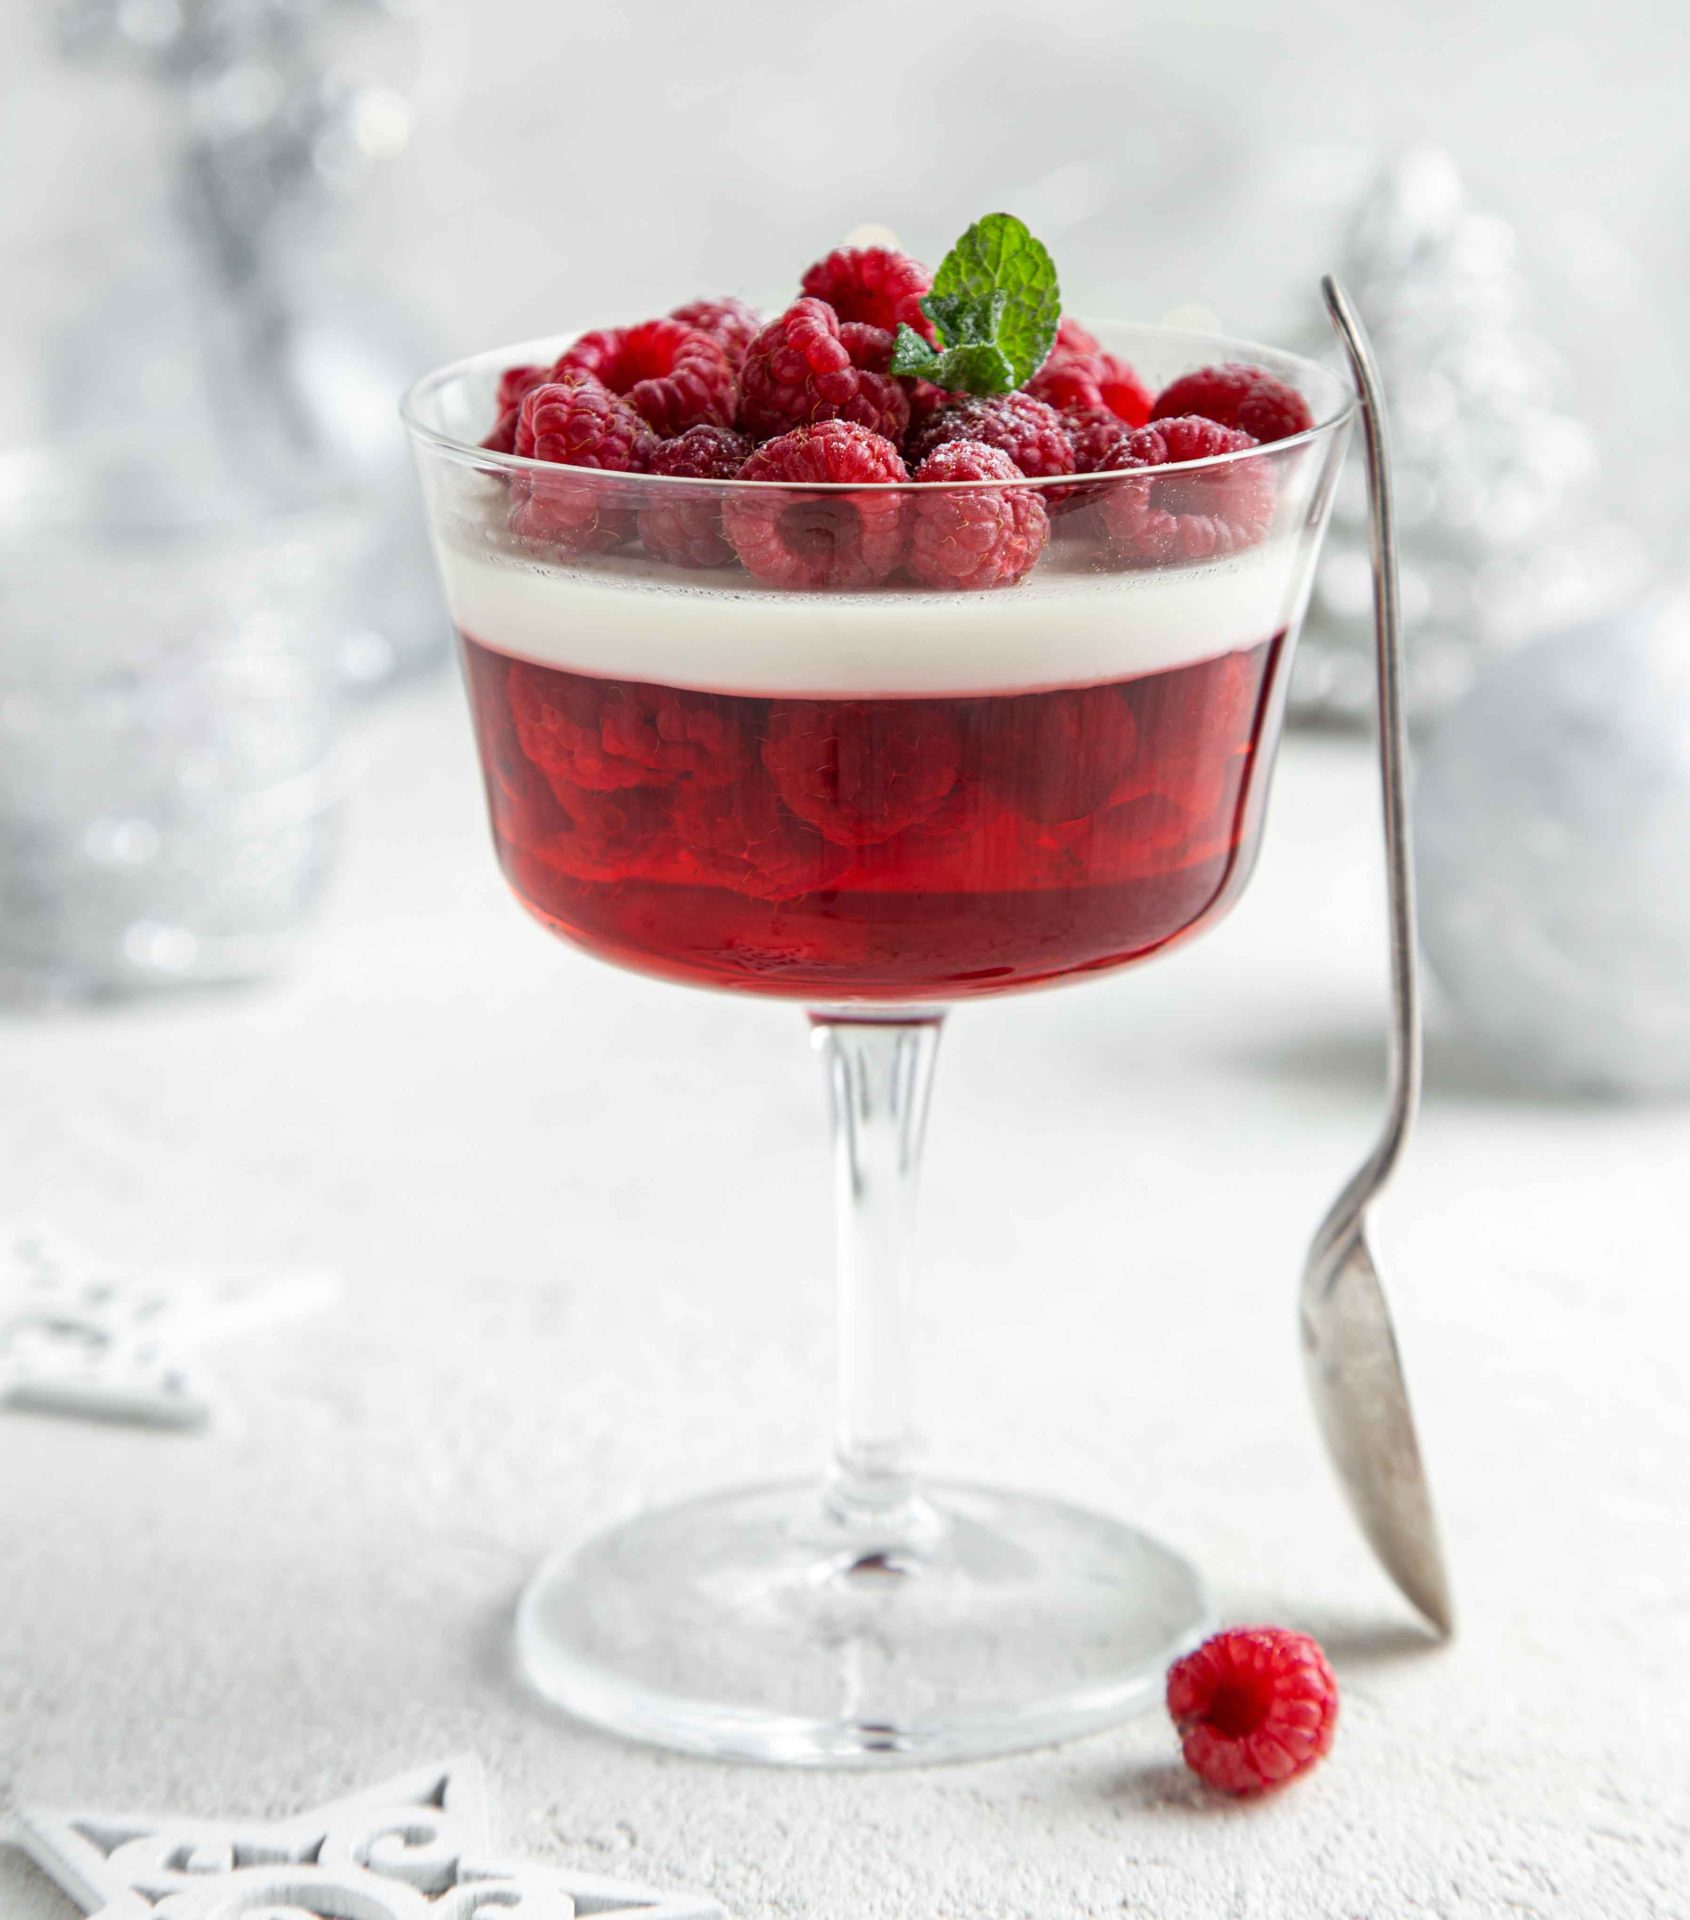 Low FODMAP Berry Coconut Panna Cotta served in an large stemmed glass. Topped with fresh raspberries and mint leaves. Spoon resting on the side. In the background are white and silver Christmas decorations.